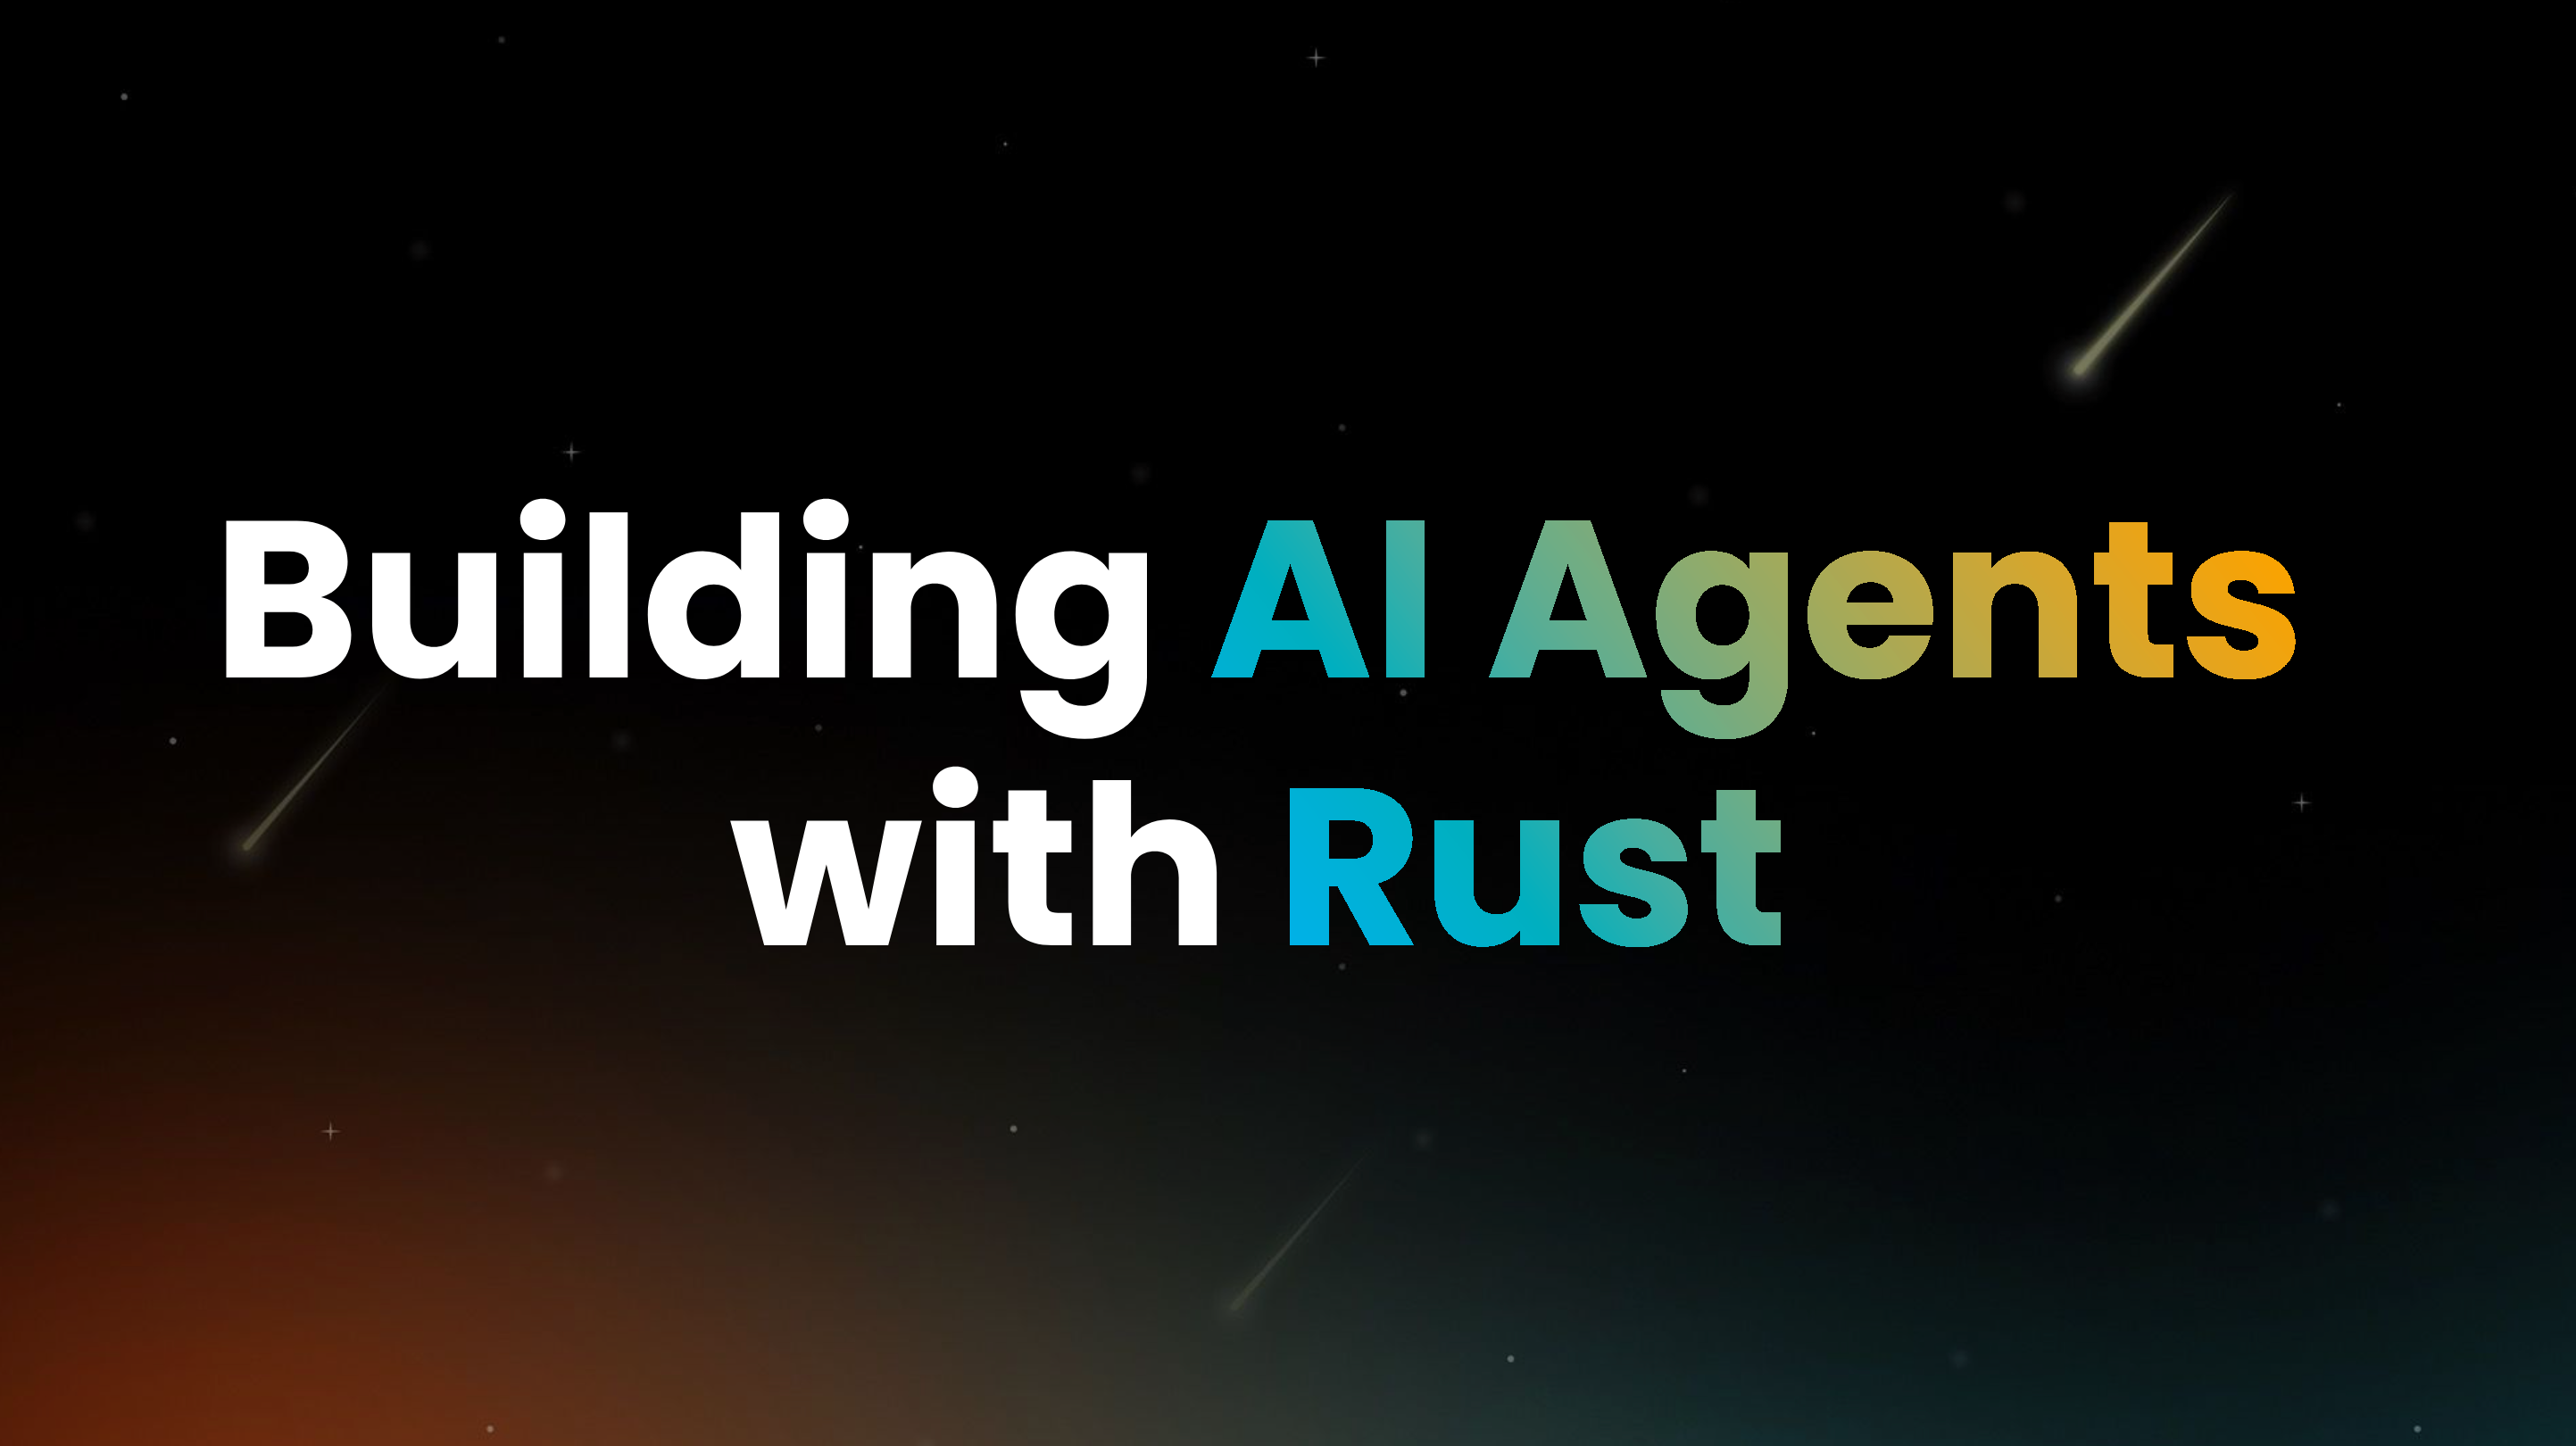 Building AI Agents with Rust